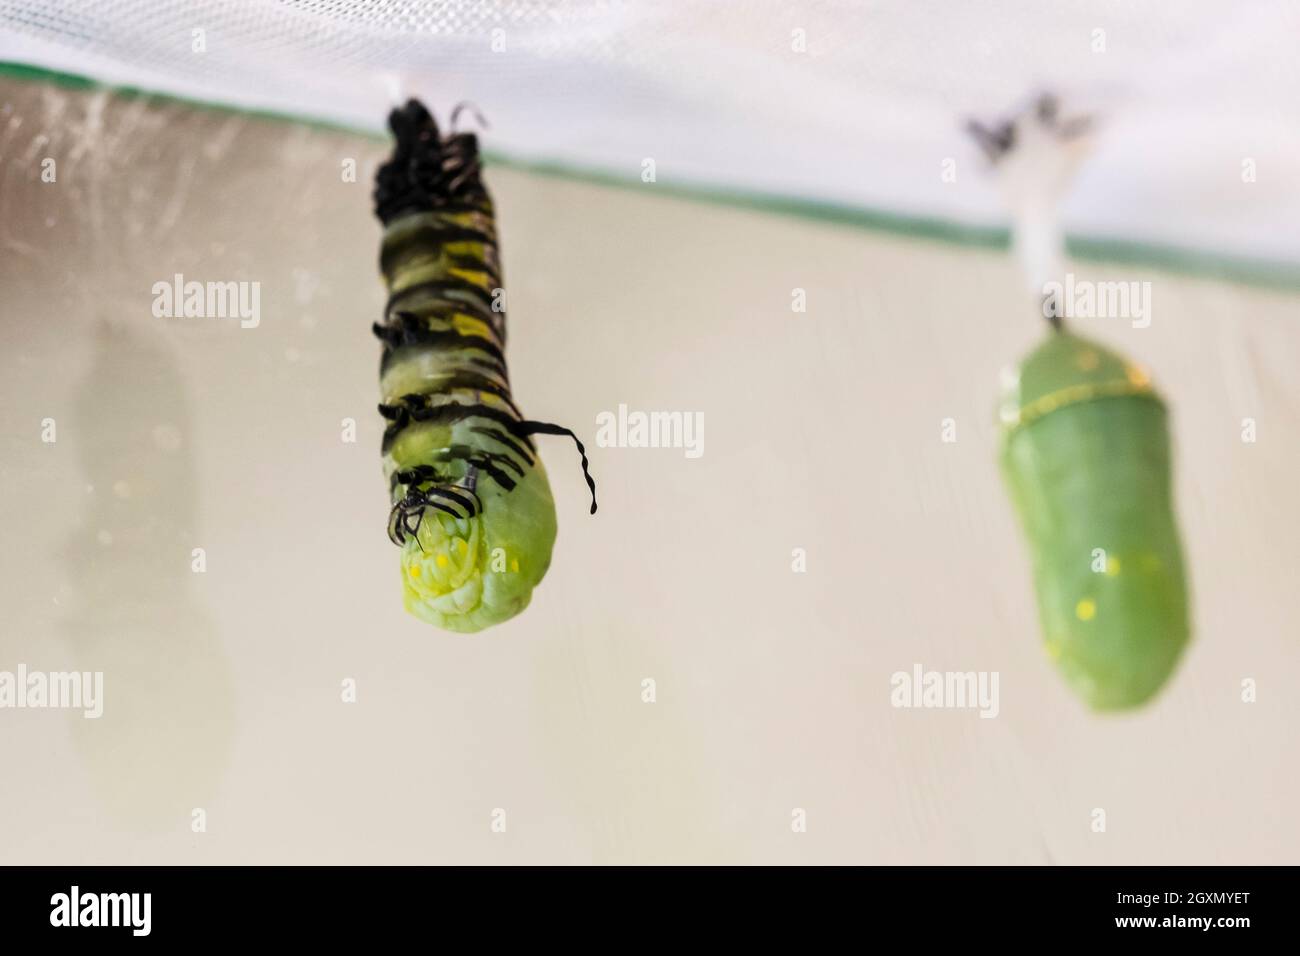 Monarch caterpillar, Danaus plexippus, in the process of pupating into a chrysalis inside of a butterfly cage. Kansas, USA. Stock Photo